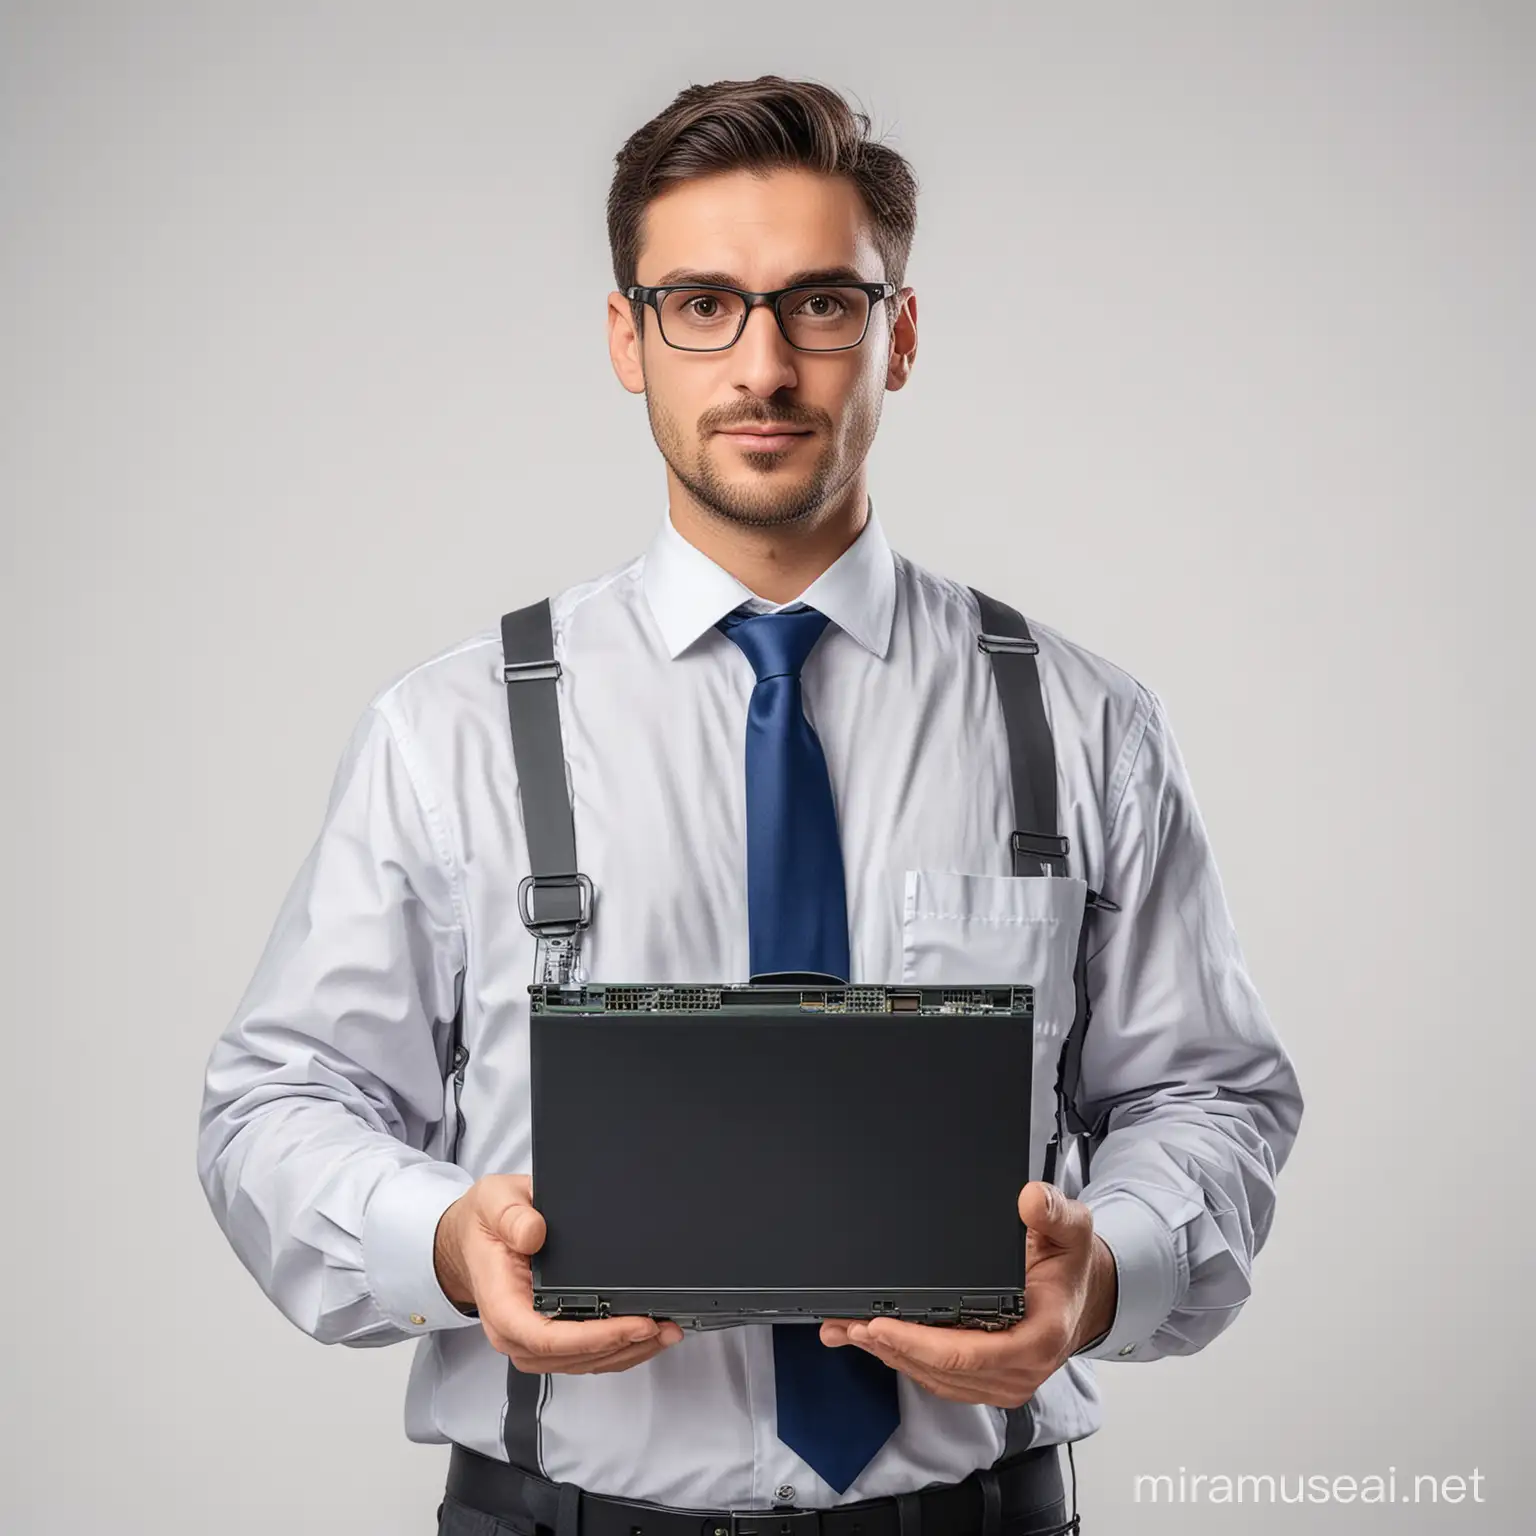 portrait (Waist up) of Computer Repair Expert wearing relevant professional attire on white background